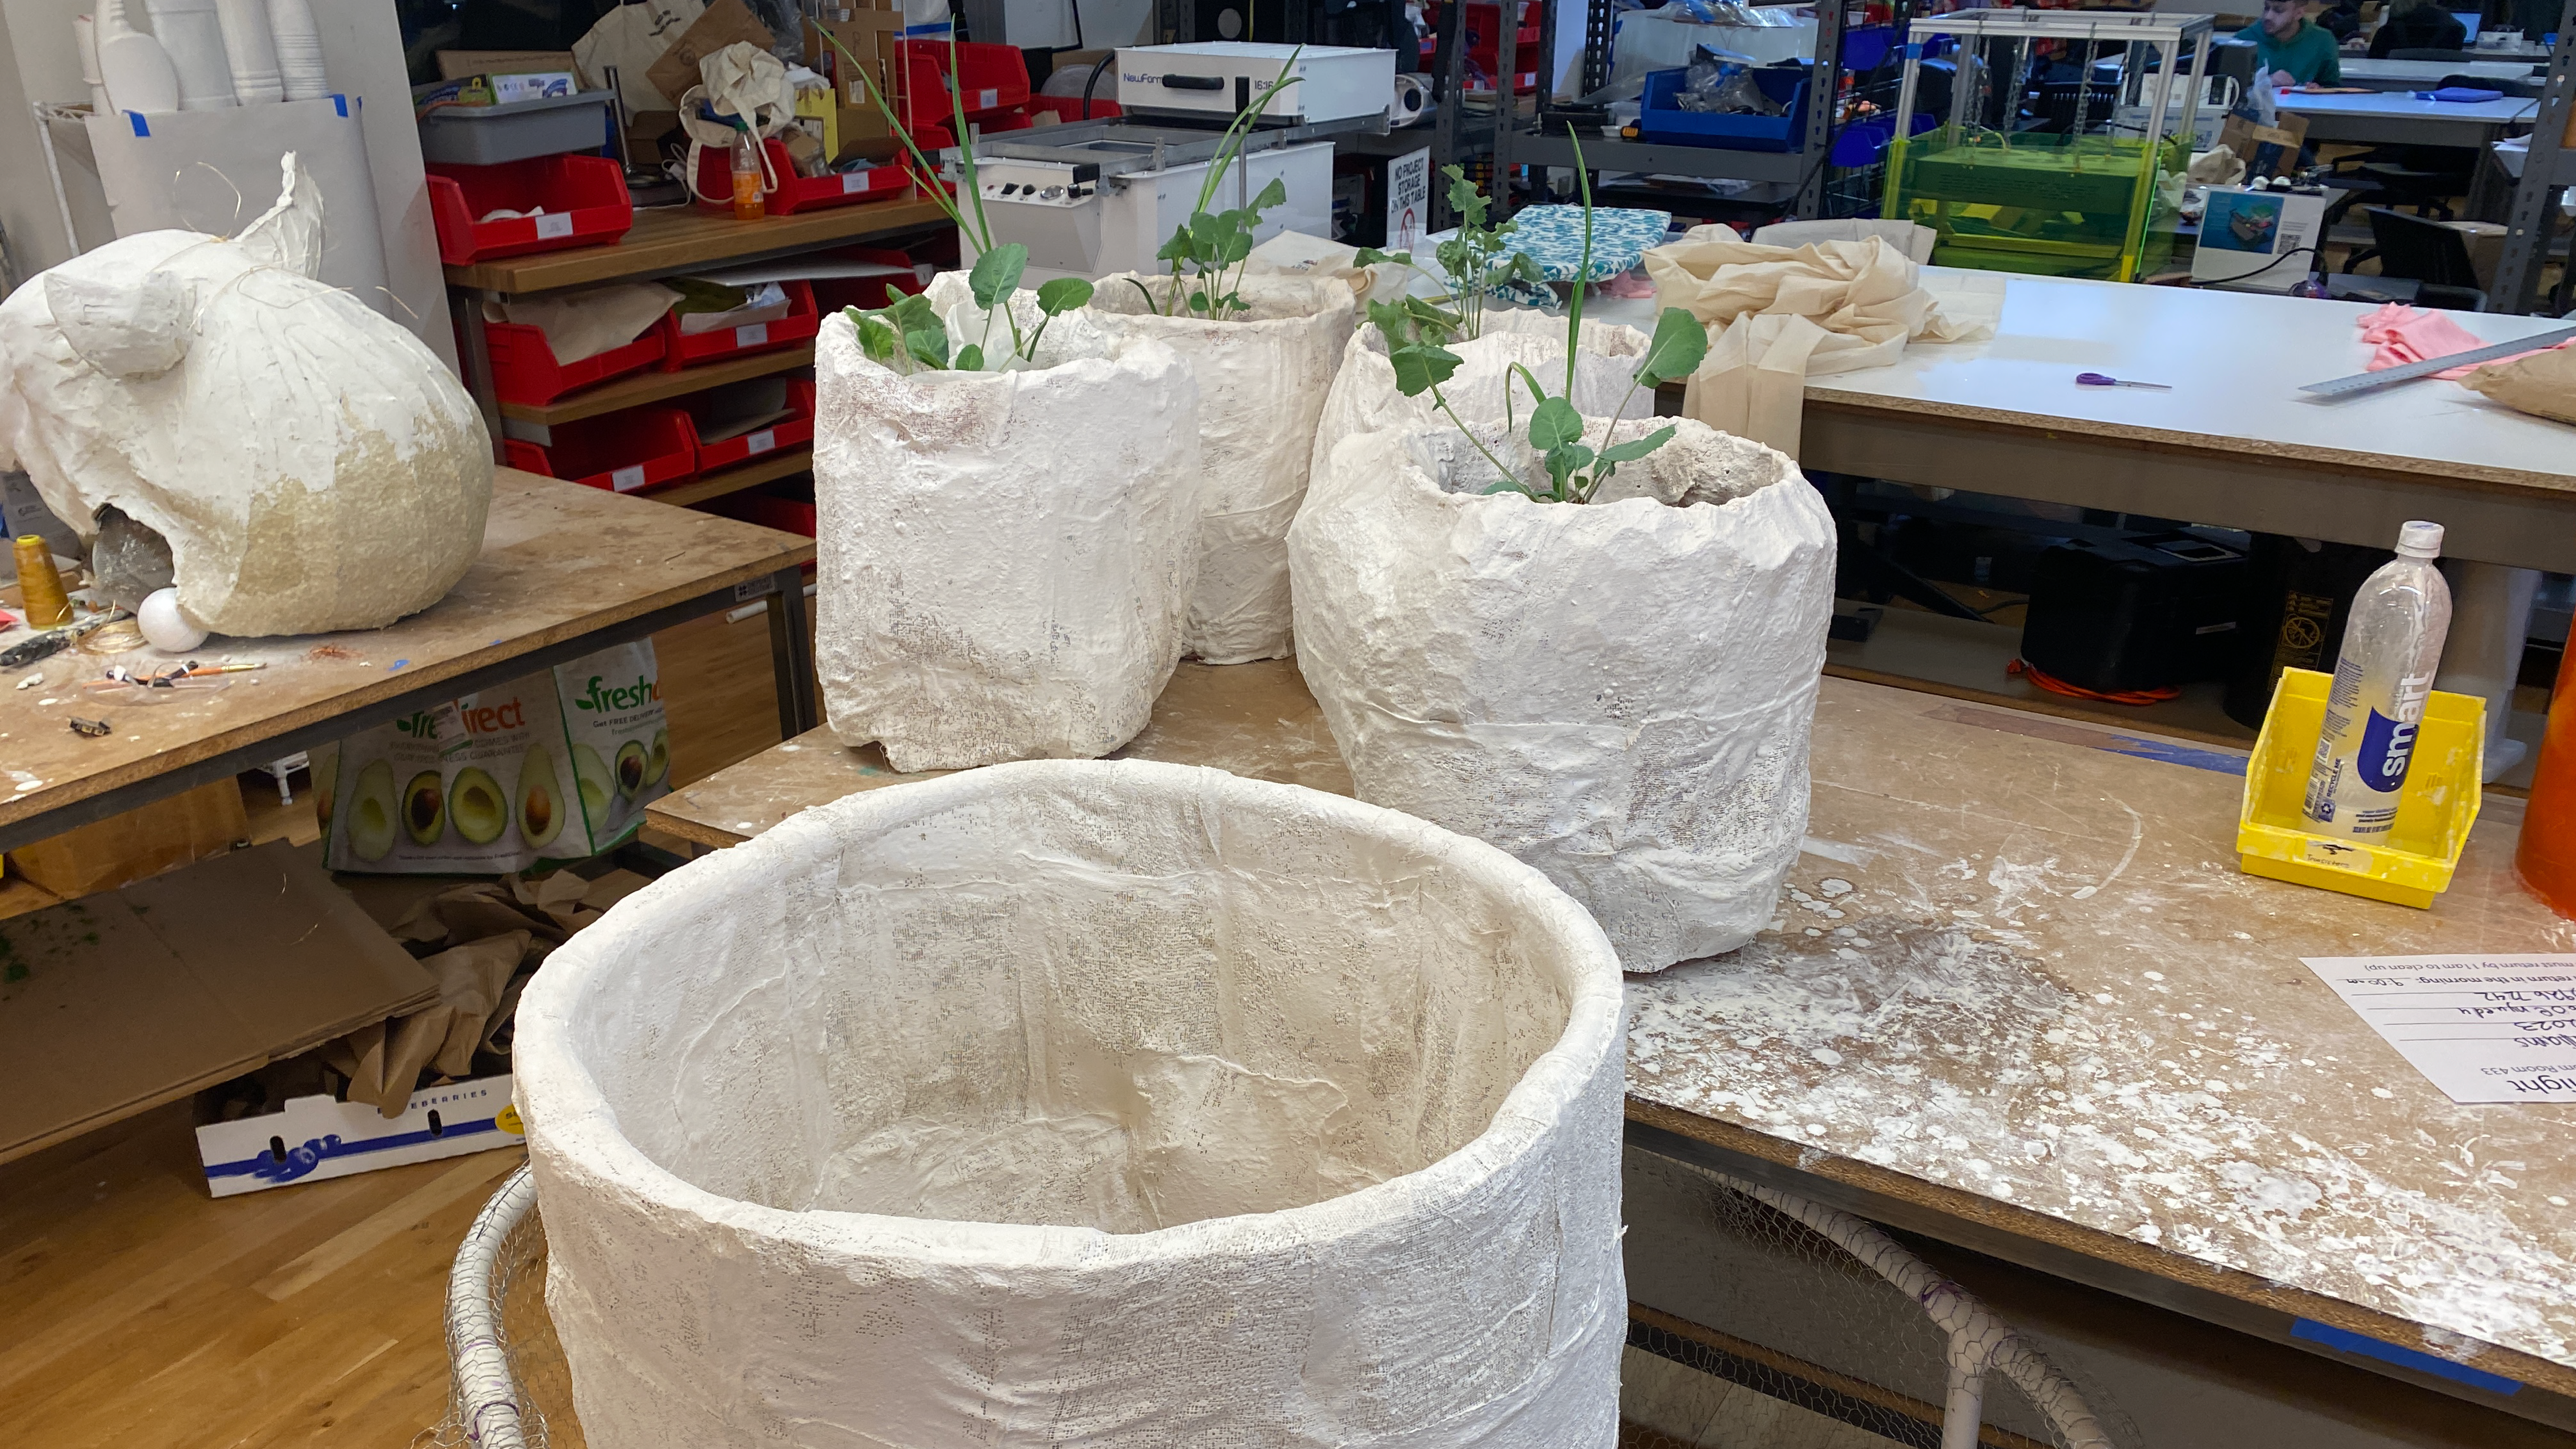 The top of a plaster tower sits in the foreground. Three plaster pots sit on a wooden table top. Each pot has green leaves from a collard plant sticking out the top.